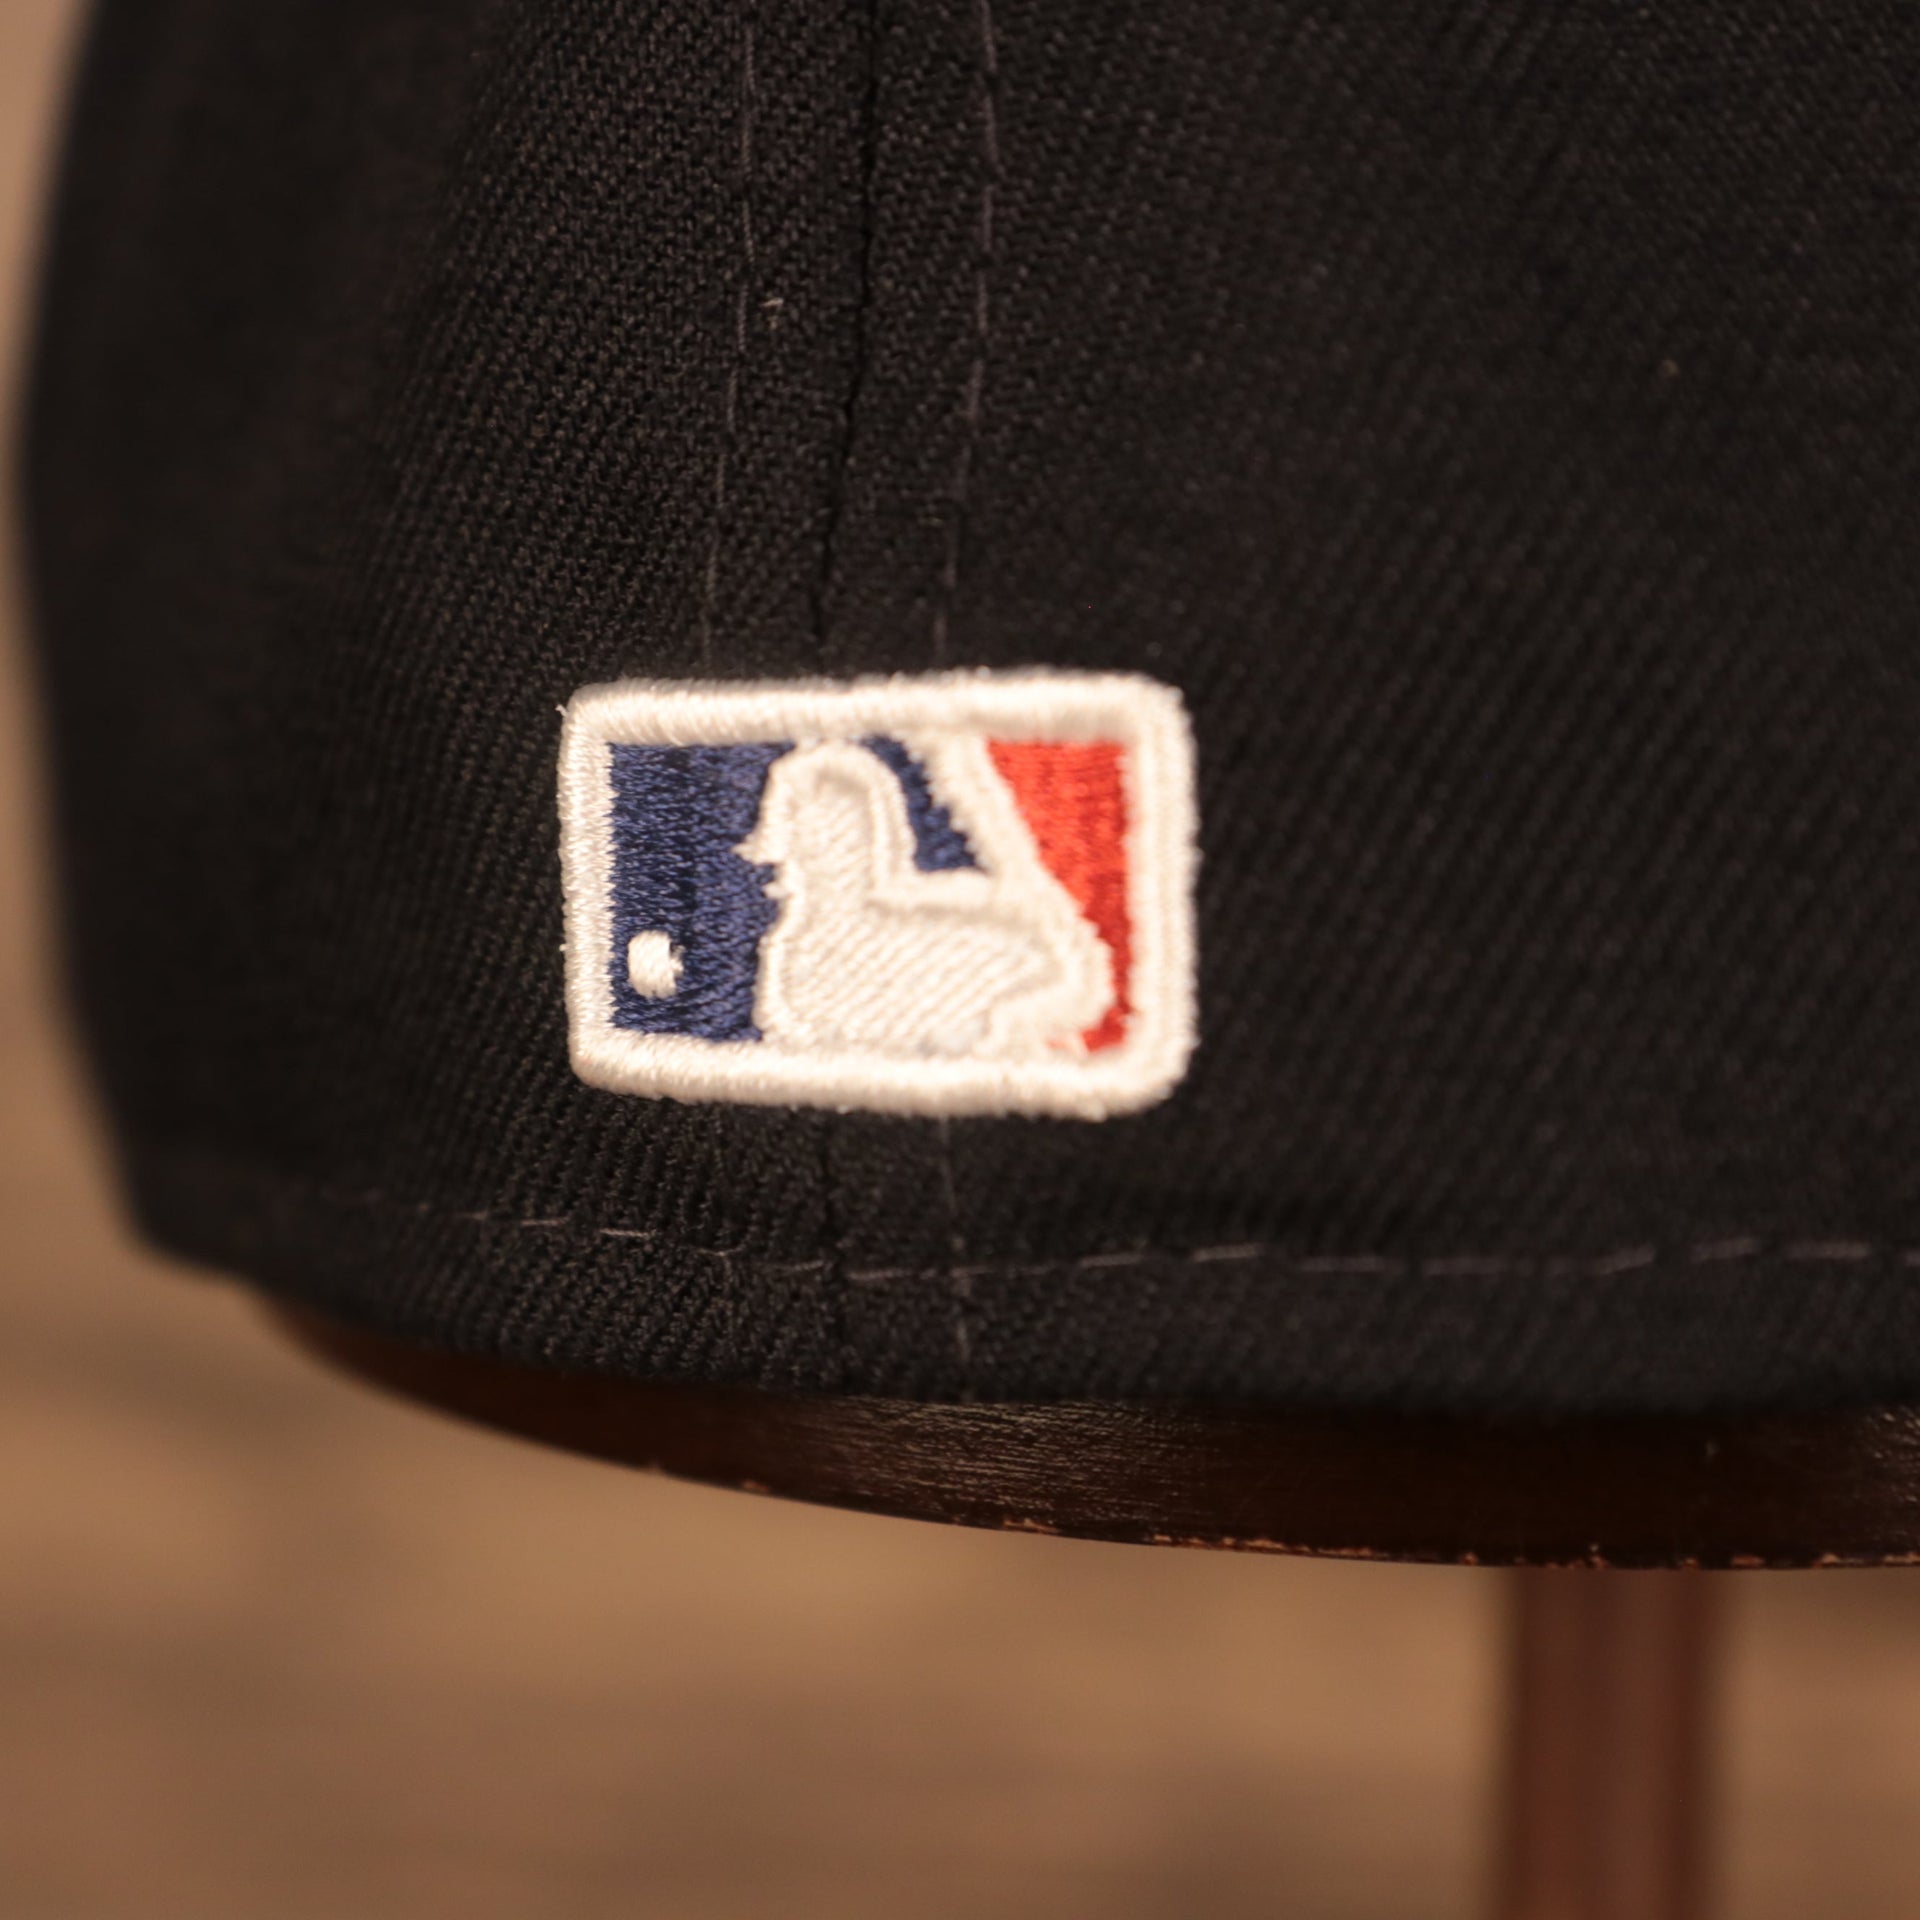 Close up of the MLB logo on the New York Yankees Multi-Color Paisley Bandana Under Brim 59Fifty Fitted Cap